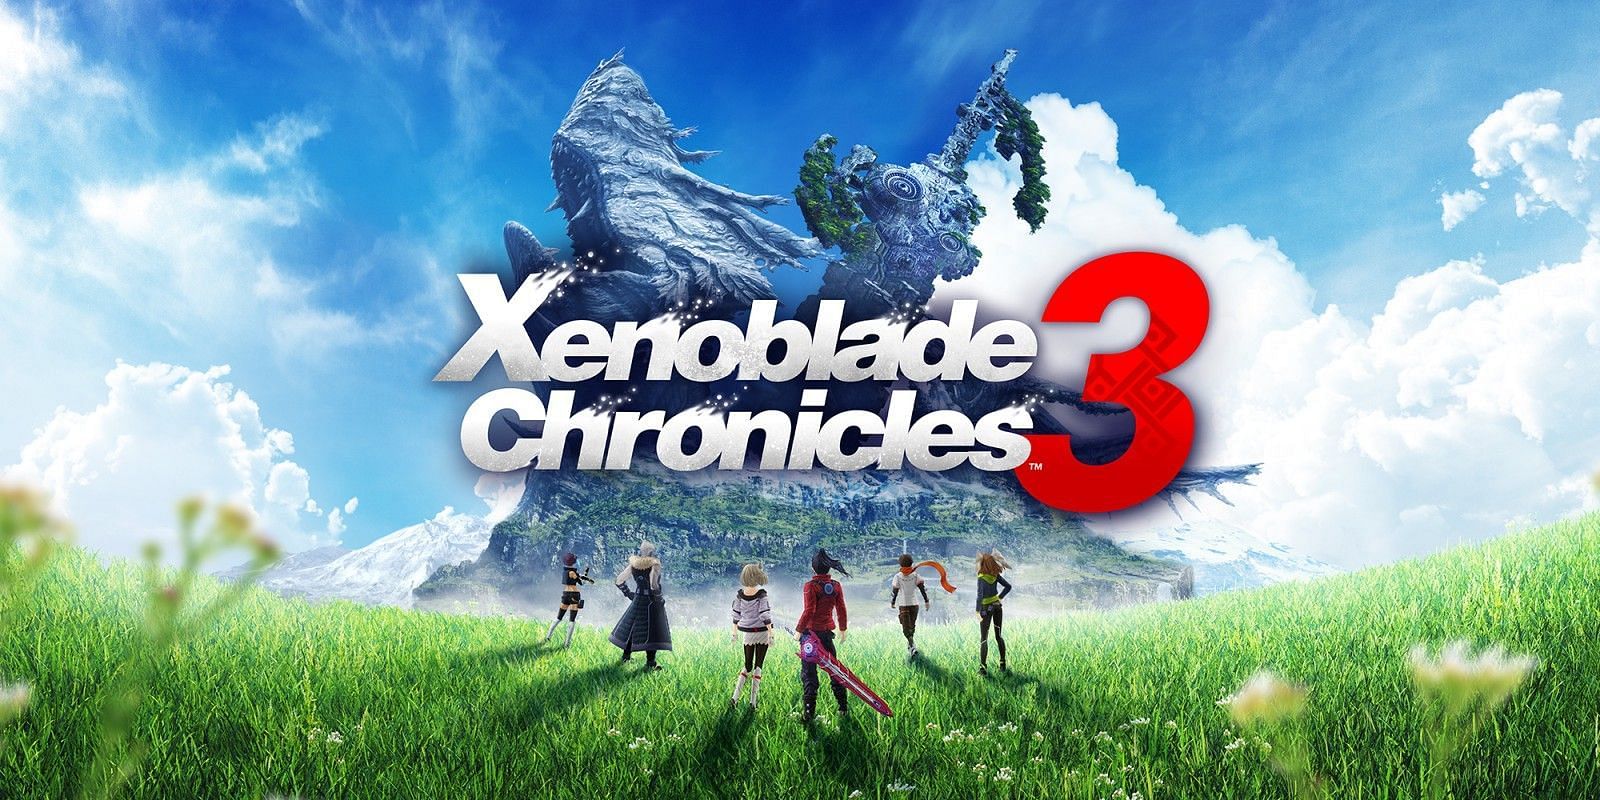 Xenoblade Chronicles 3 is one of the best games for FF7 fans to play (Image via Monolith Soft/Nintendo)